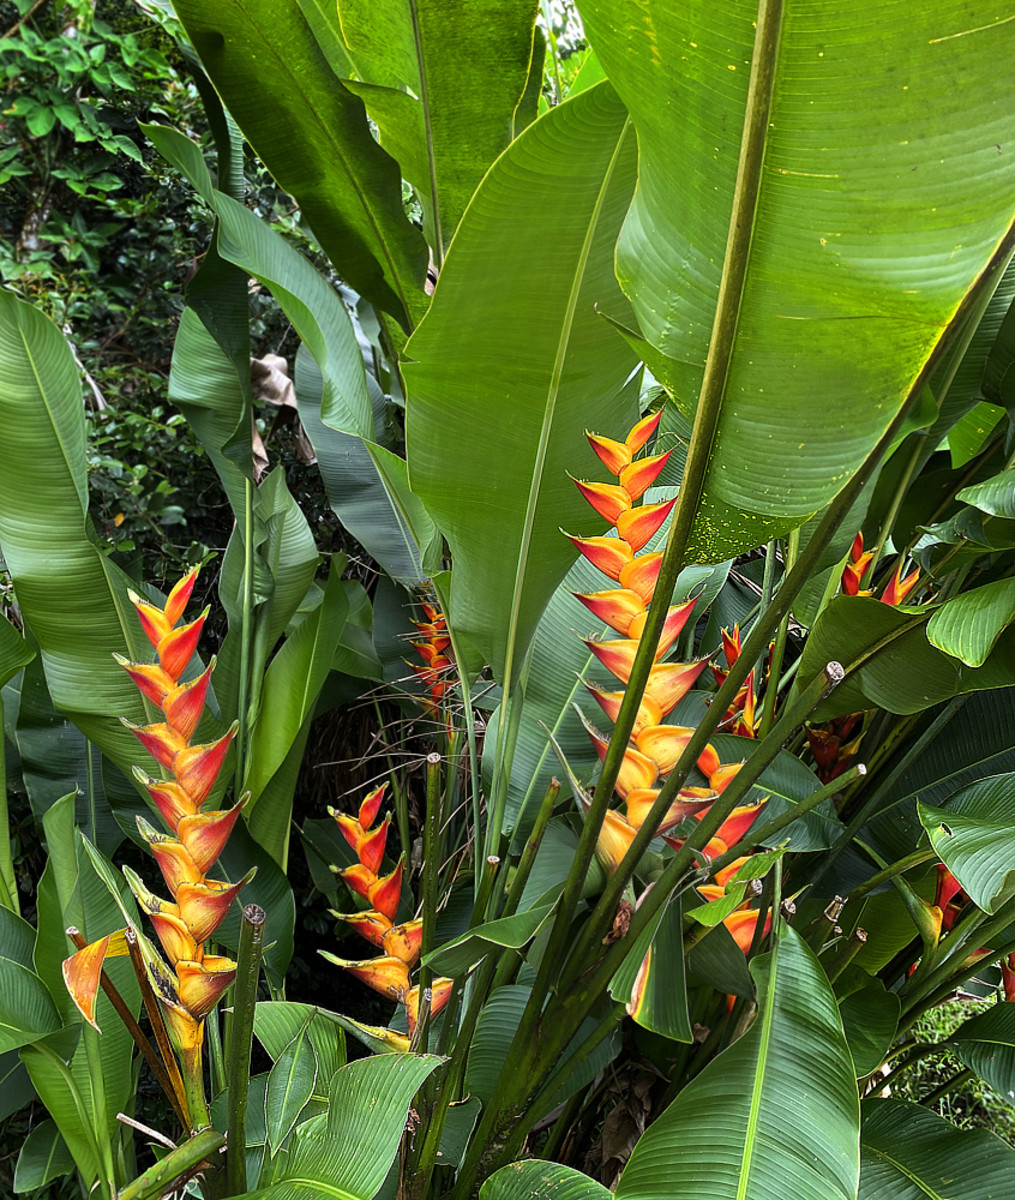 This heliconia grows in an upright habit with lovely peach-apricot colored flower bracts.